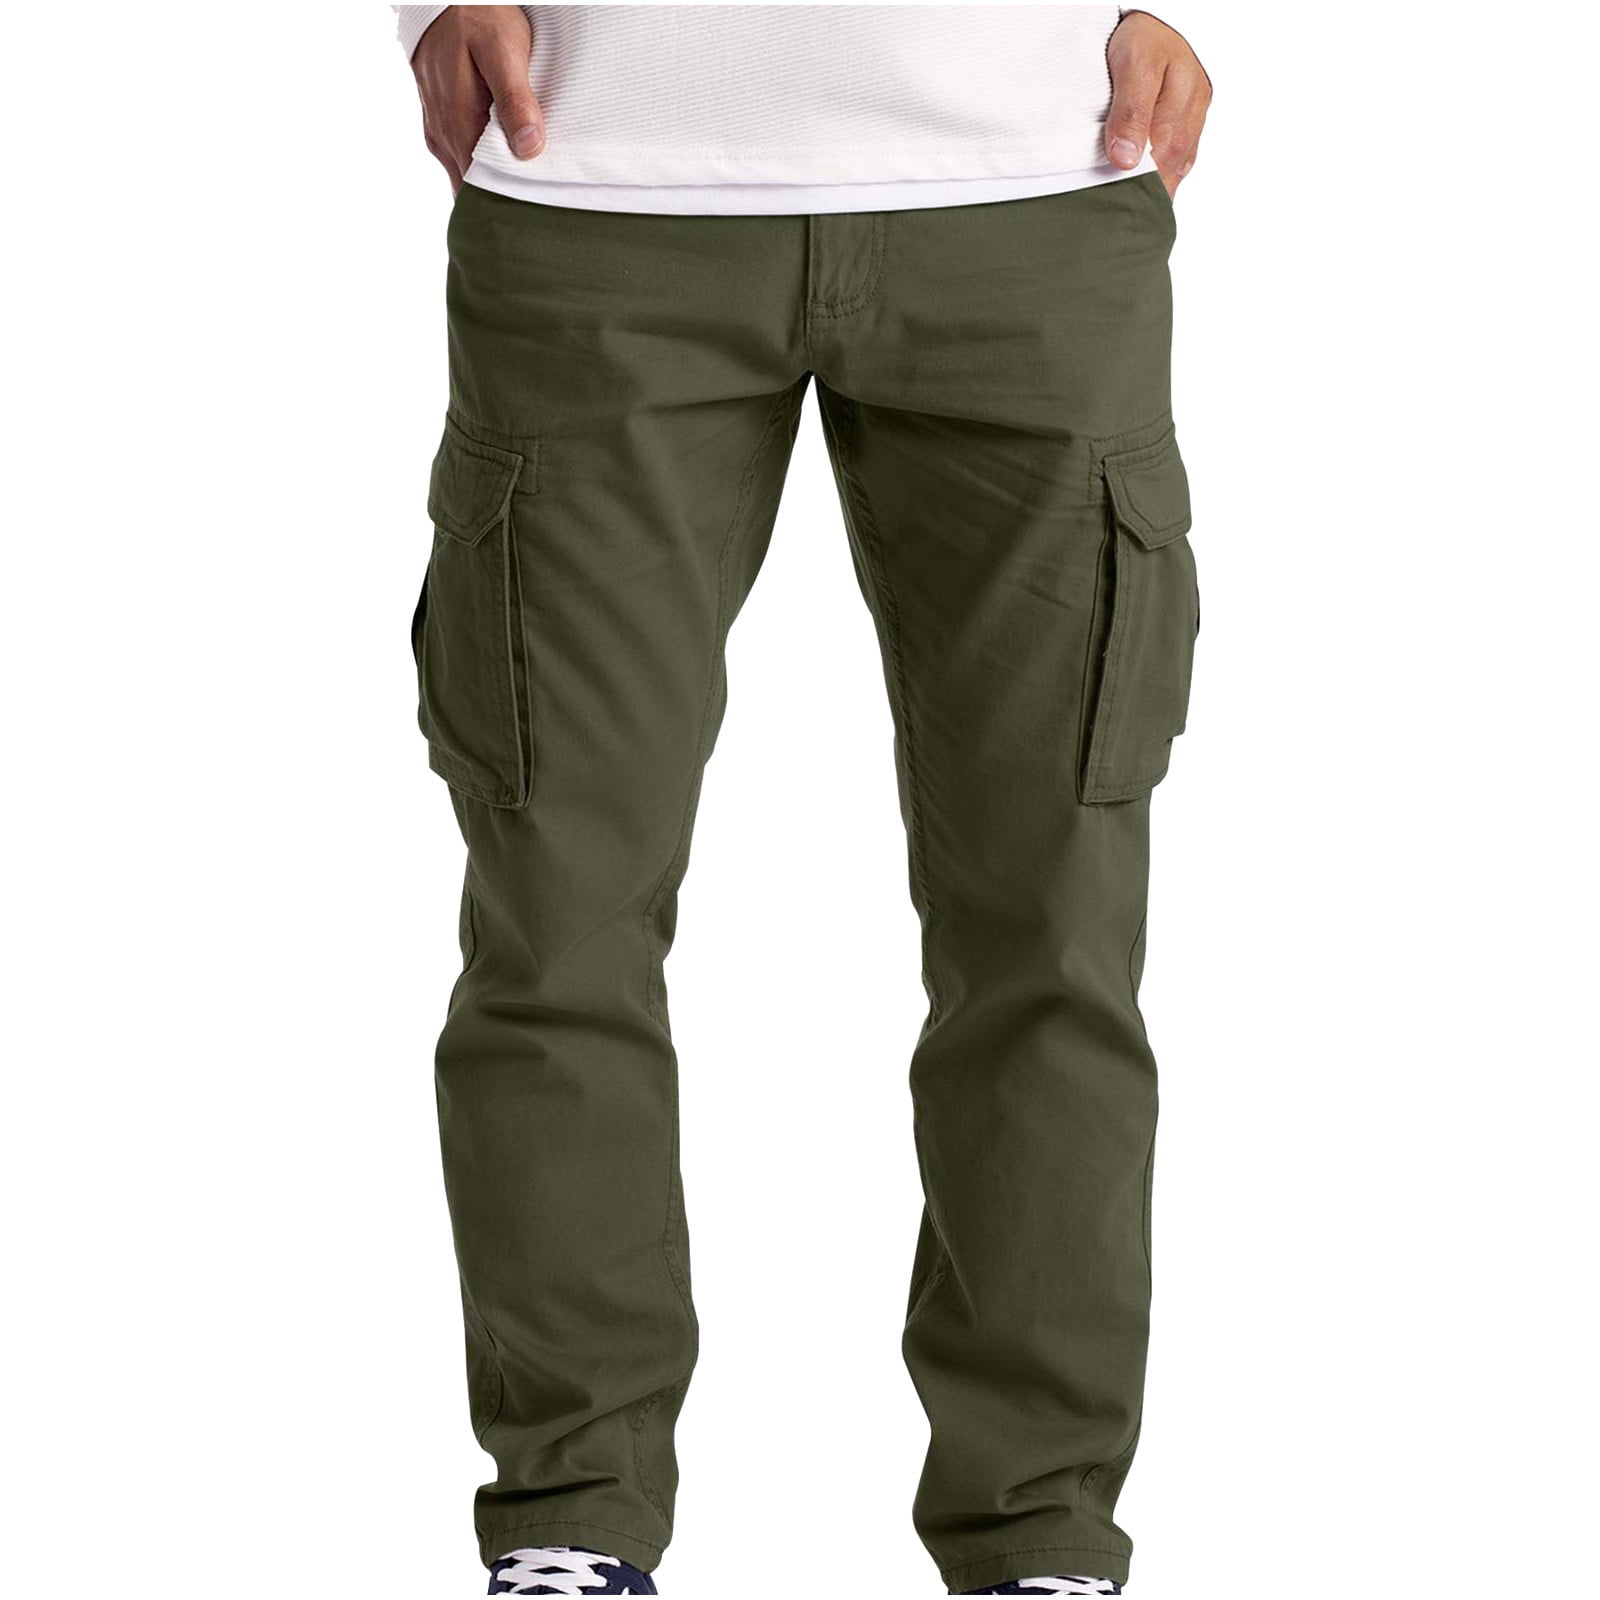 Mens Cargo Trousers Pocket Work Tactical Military Combat Casual Travel Pants